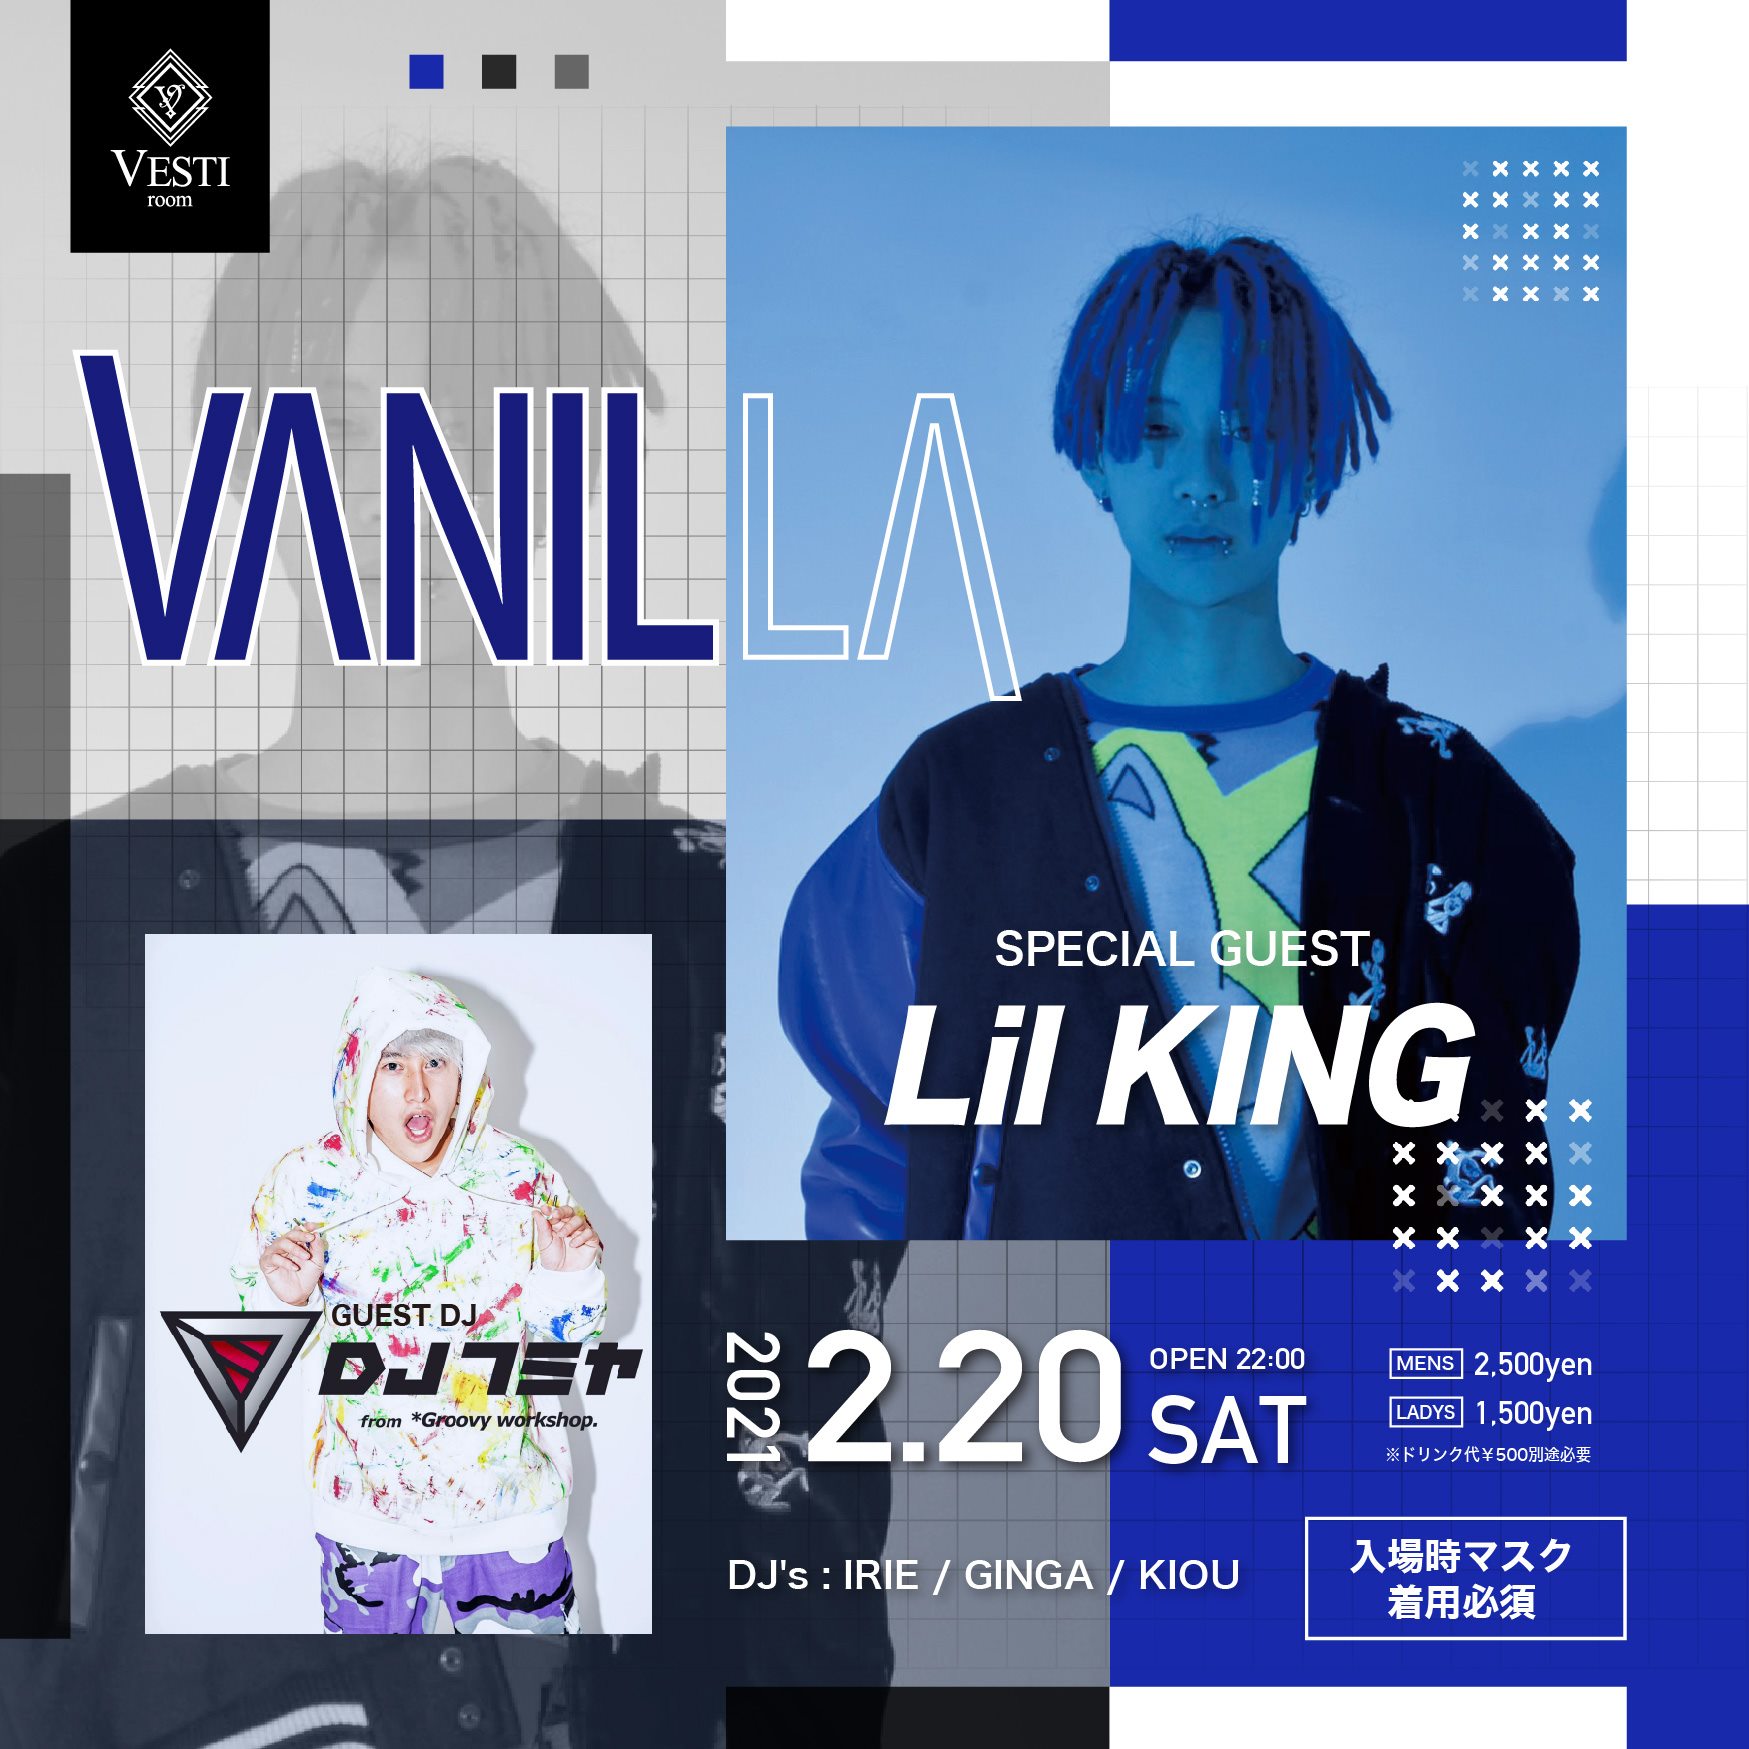 VANILLA ～Special Guest : Lil KING～